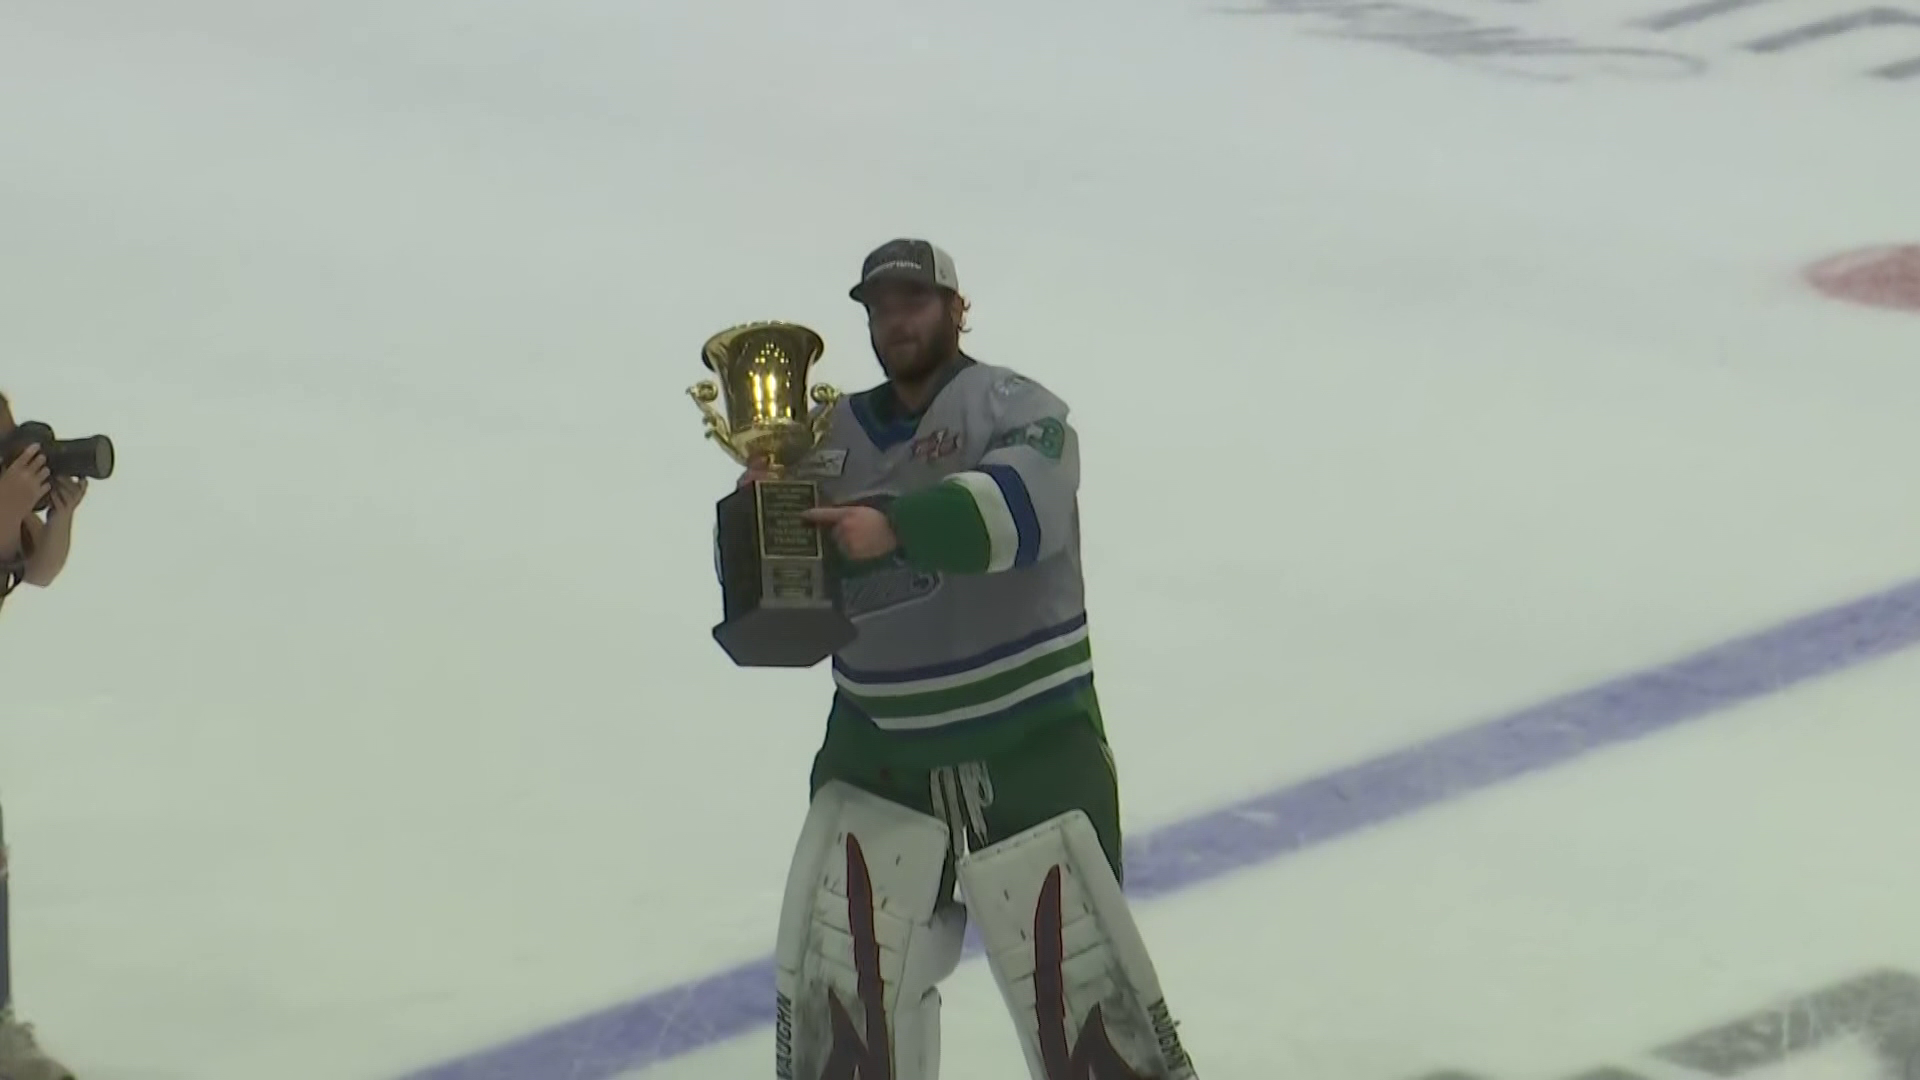 Everblades win the Kelly Cup defeating the Walleye